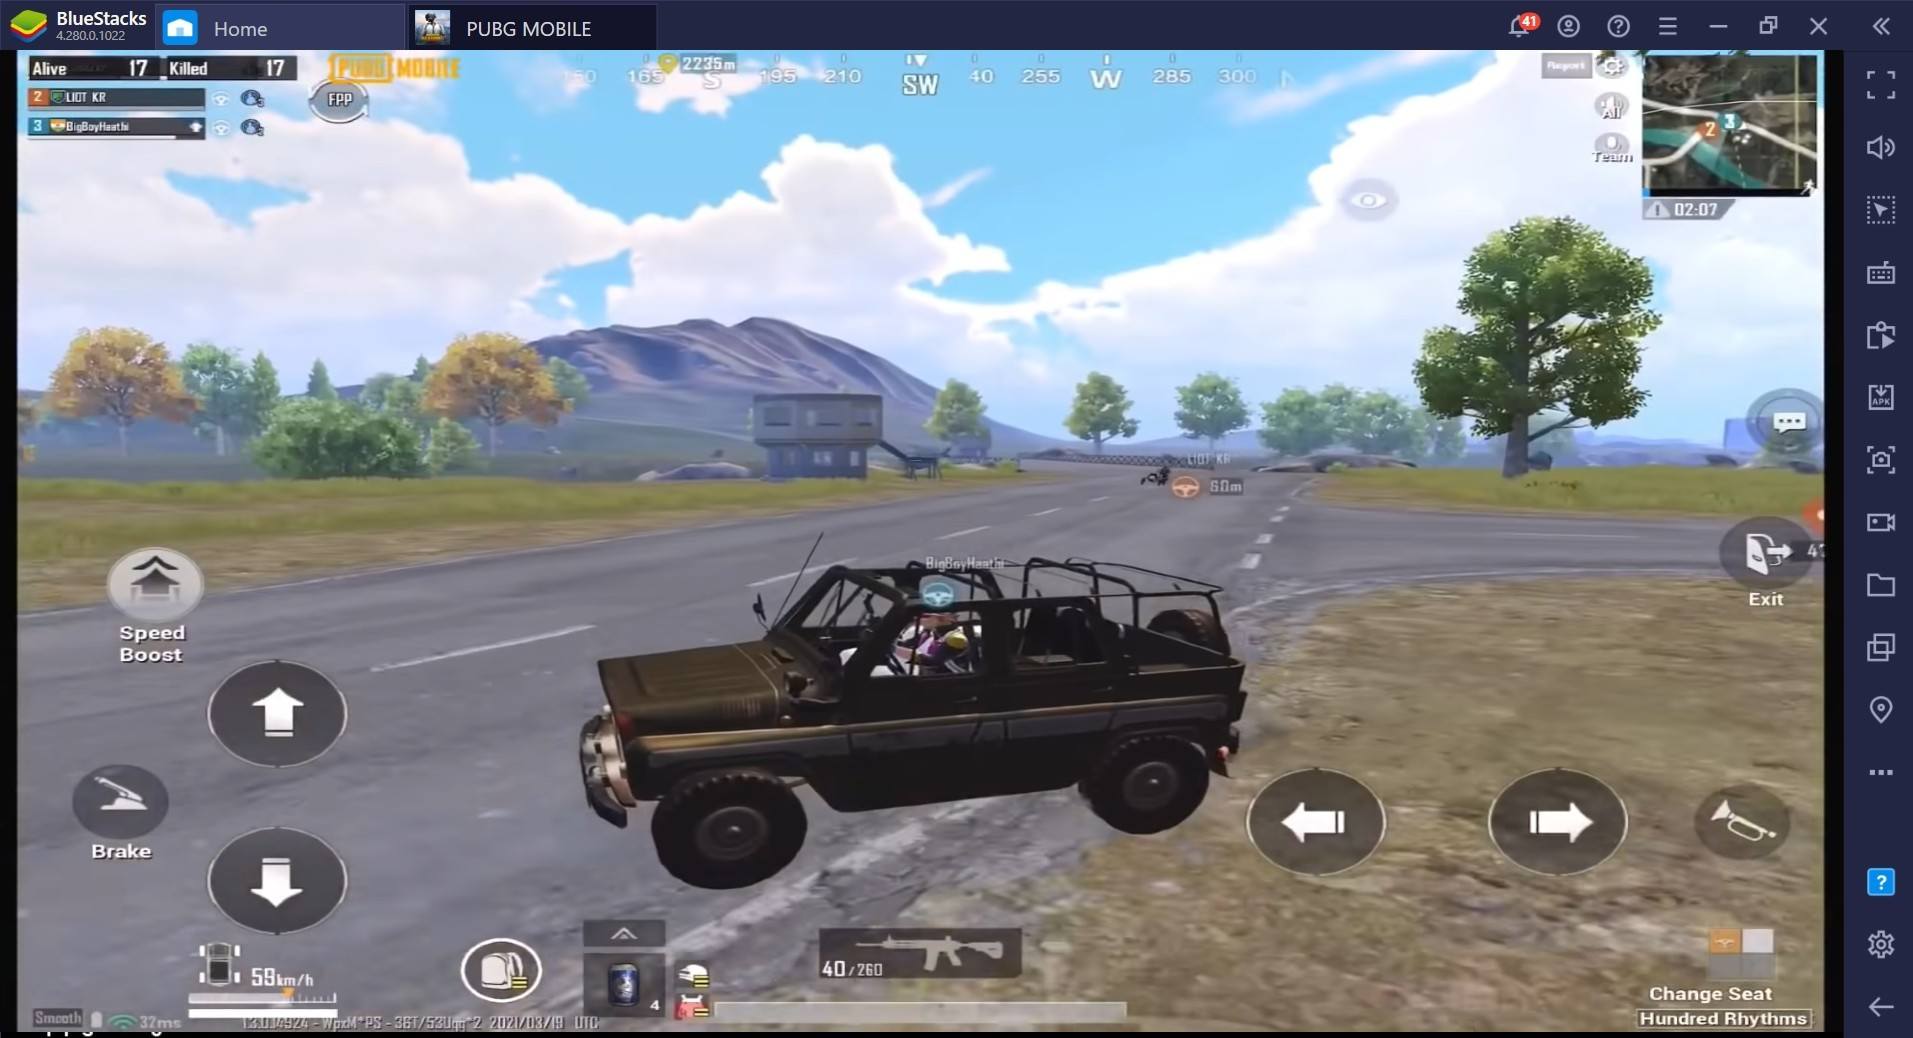 Kills On Wheels: BlueStacks Guide to Vehicles in PUBG Mobile